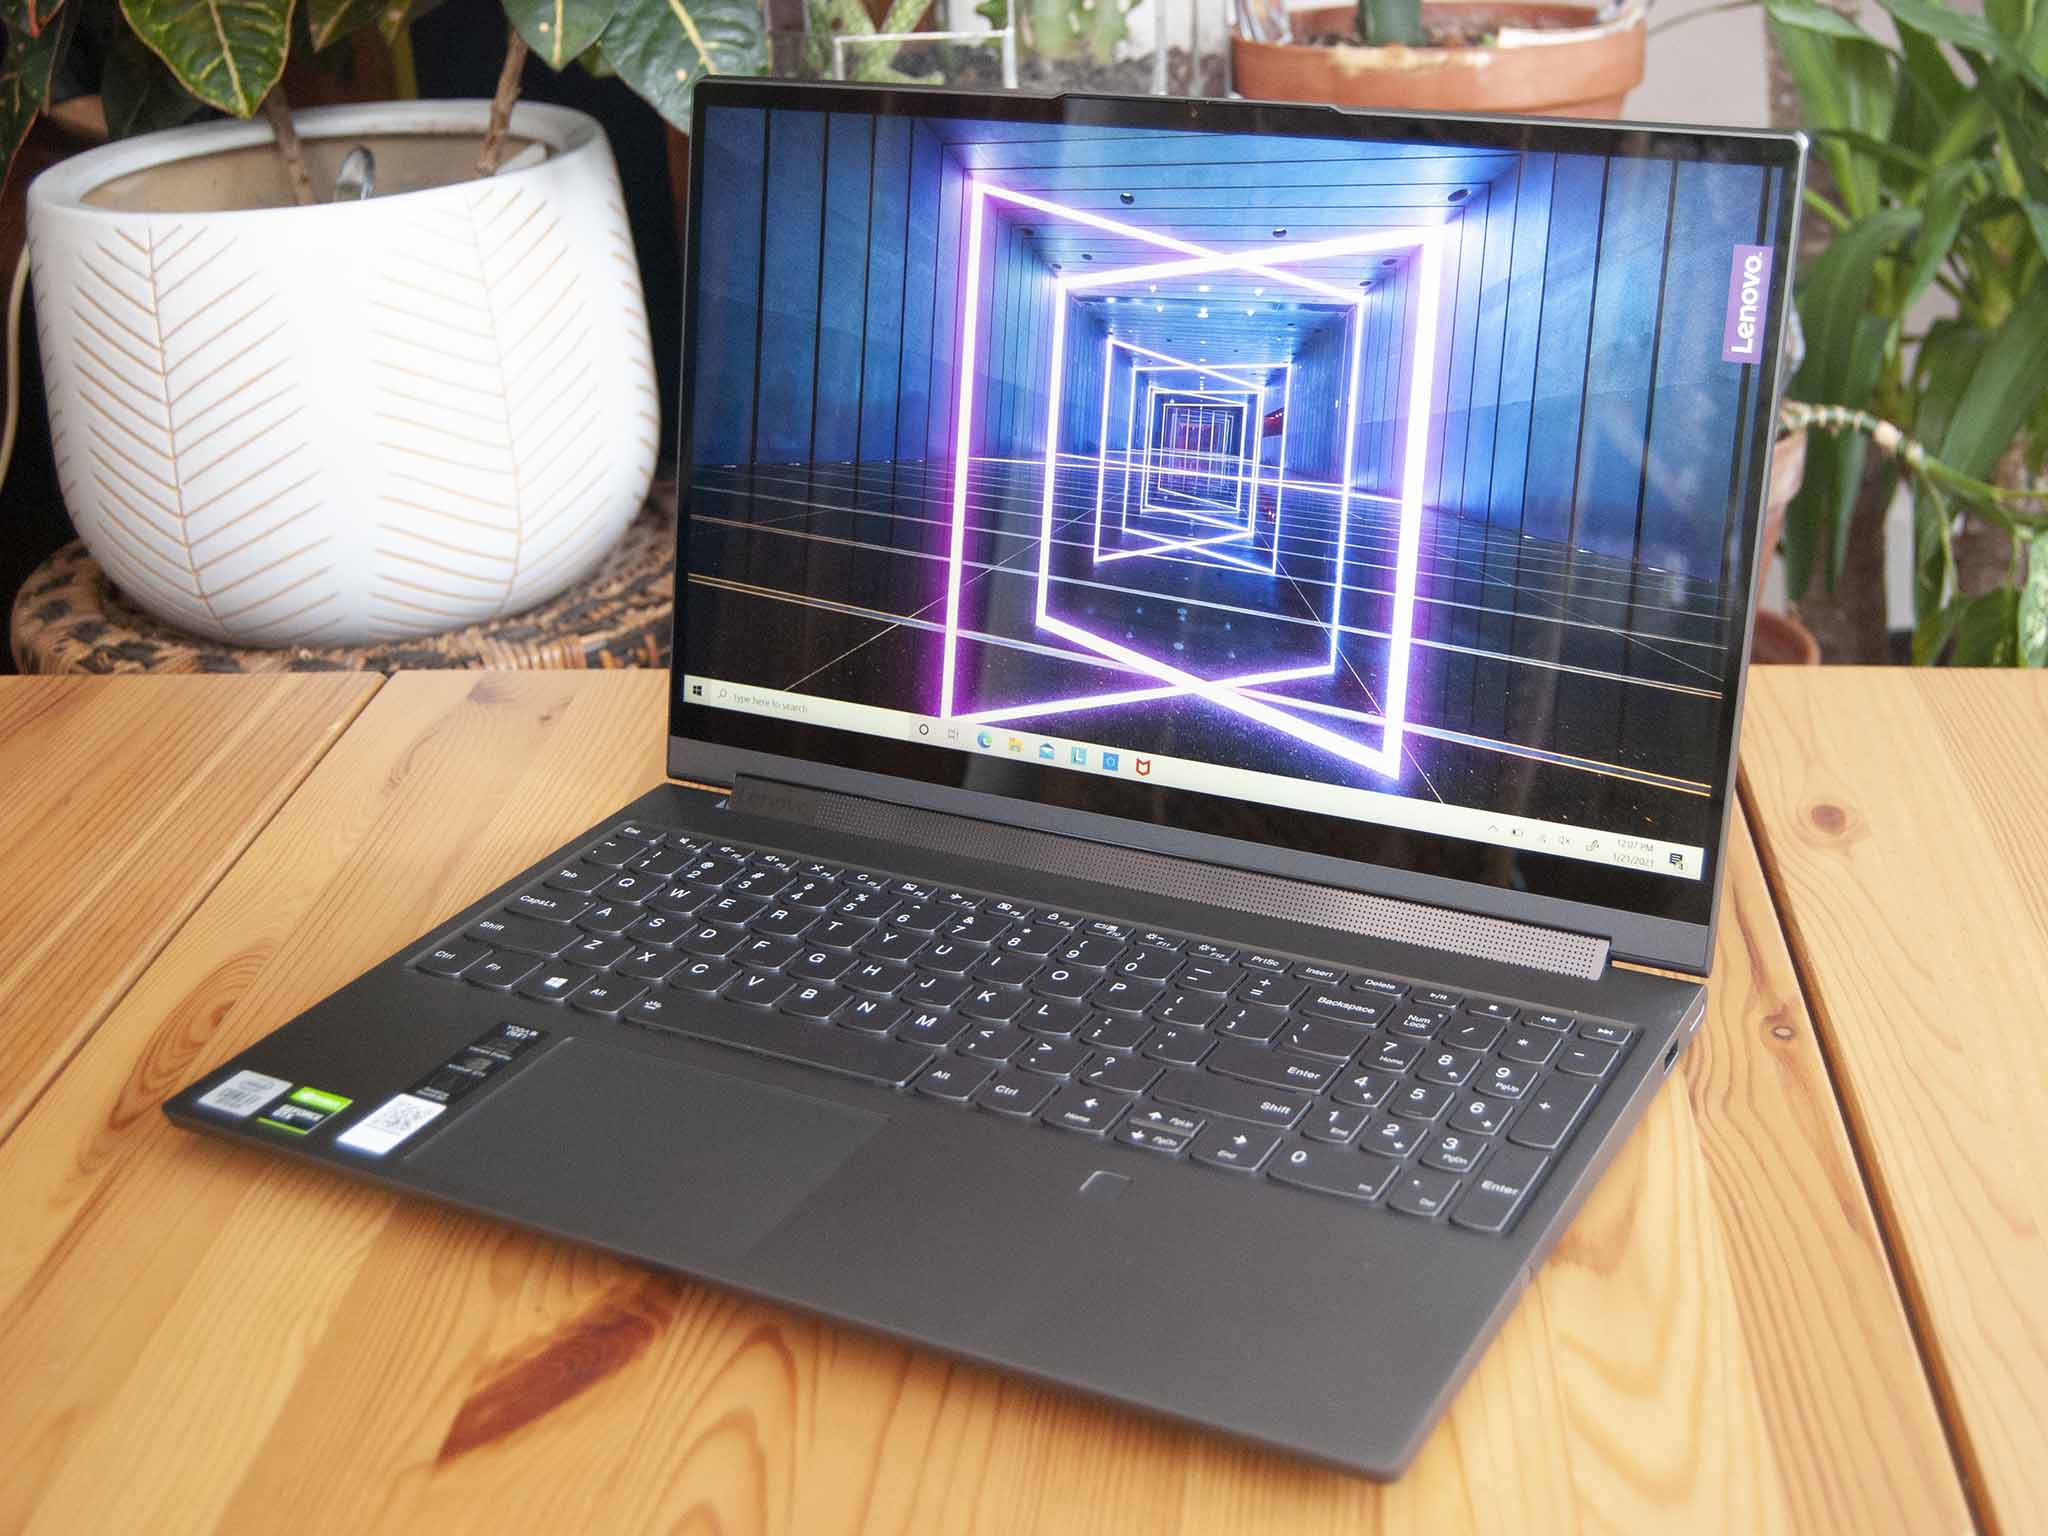 Best cheap laptop deals July 2021: ASUS, Lenovo, Microsoft, and more